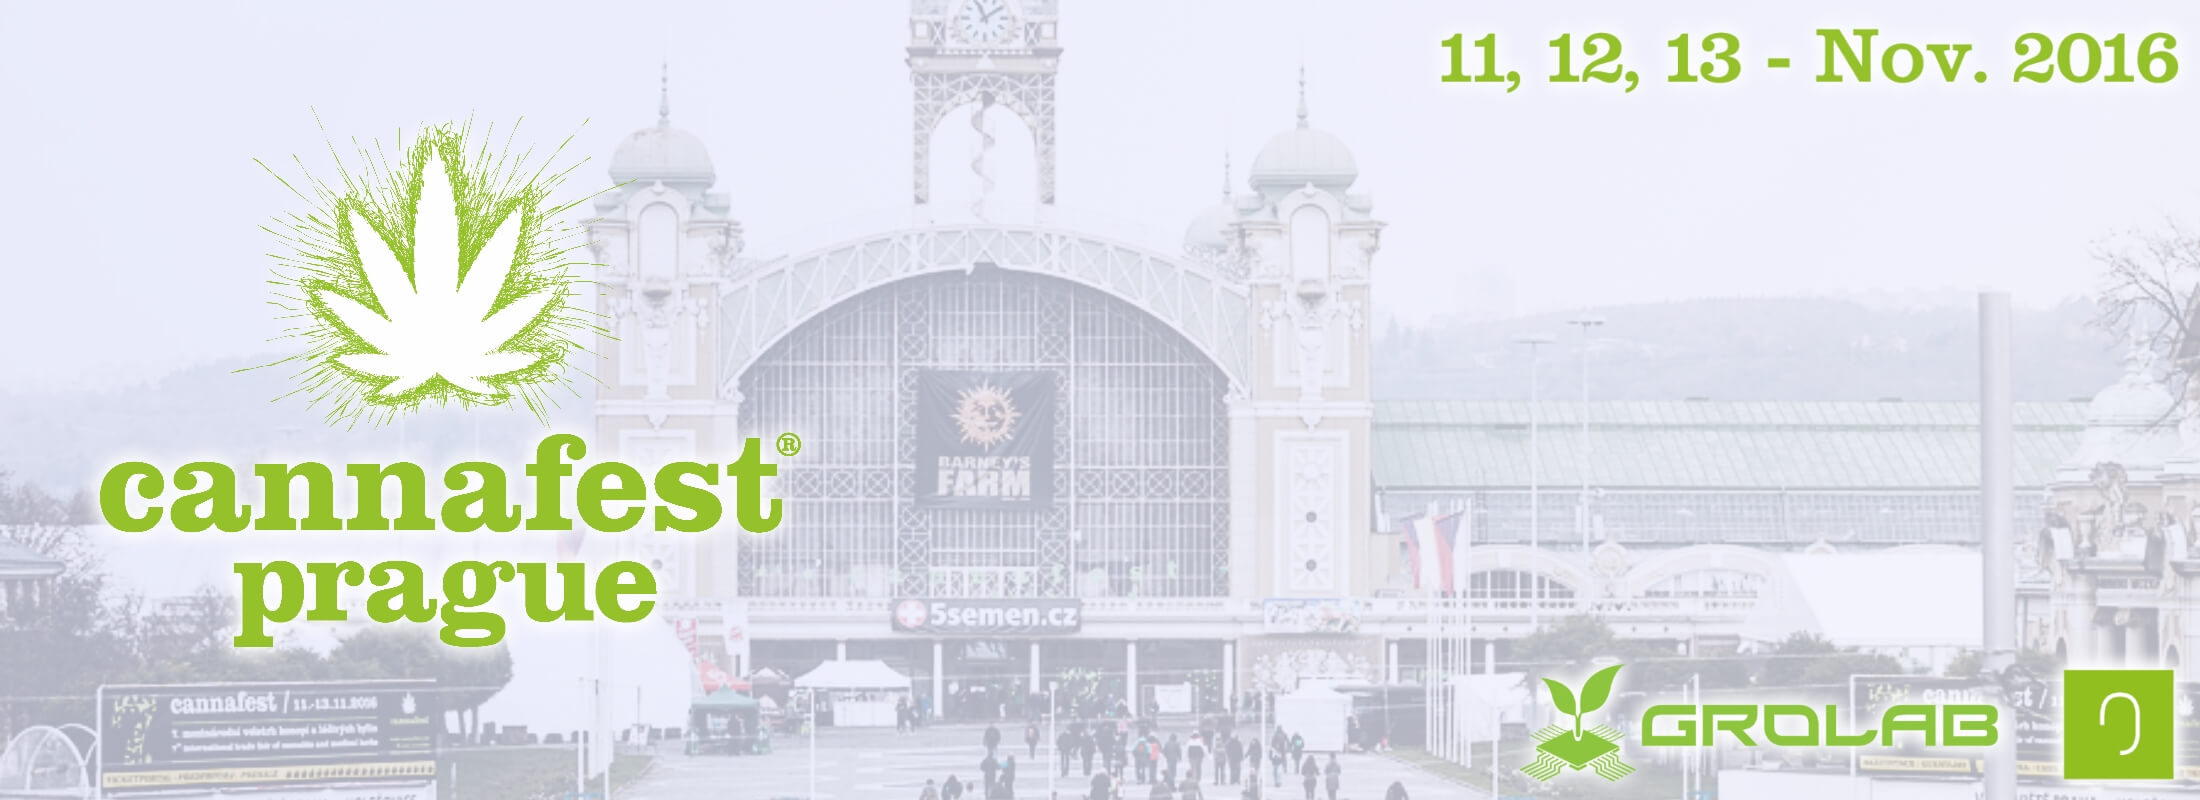 Cannafest Prague 2016 outside view, with Cannafest logo on left, on top right the event date (11, 12 and 13 - Nov. 2016), Open Grow™ and GroLab™ logos on bottom-right corner